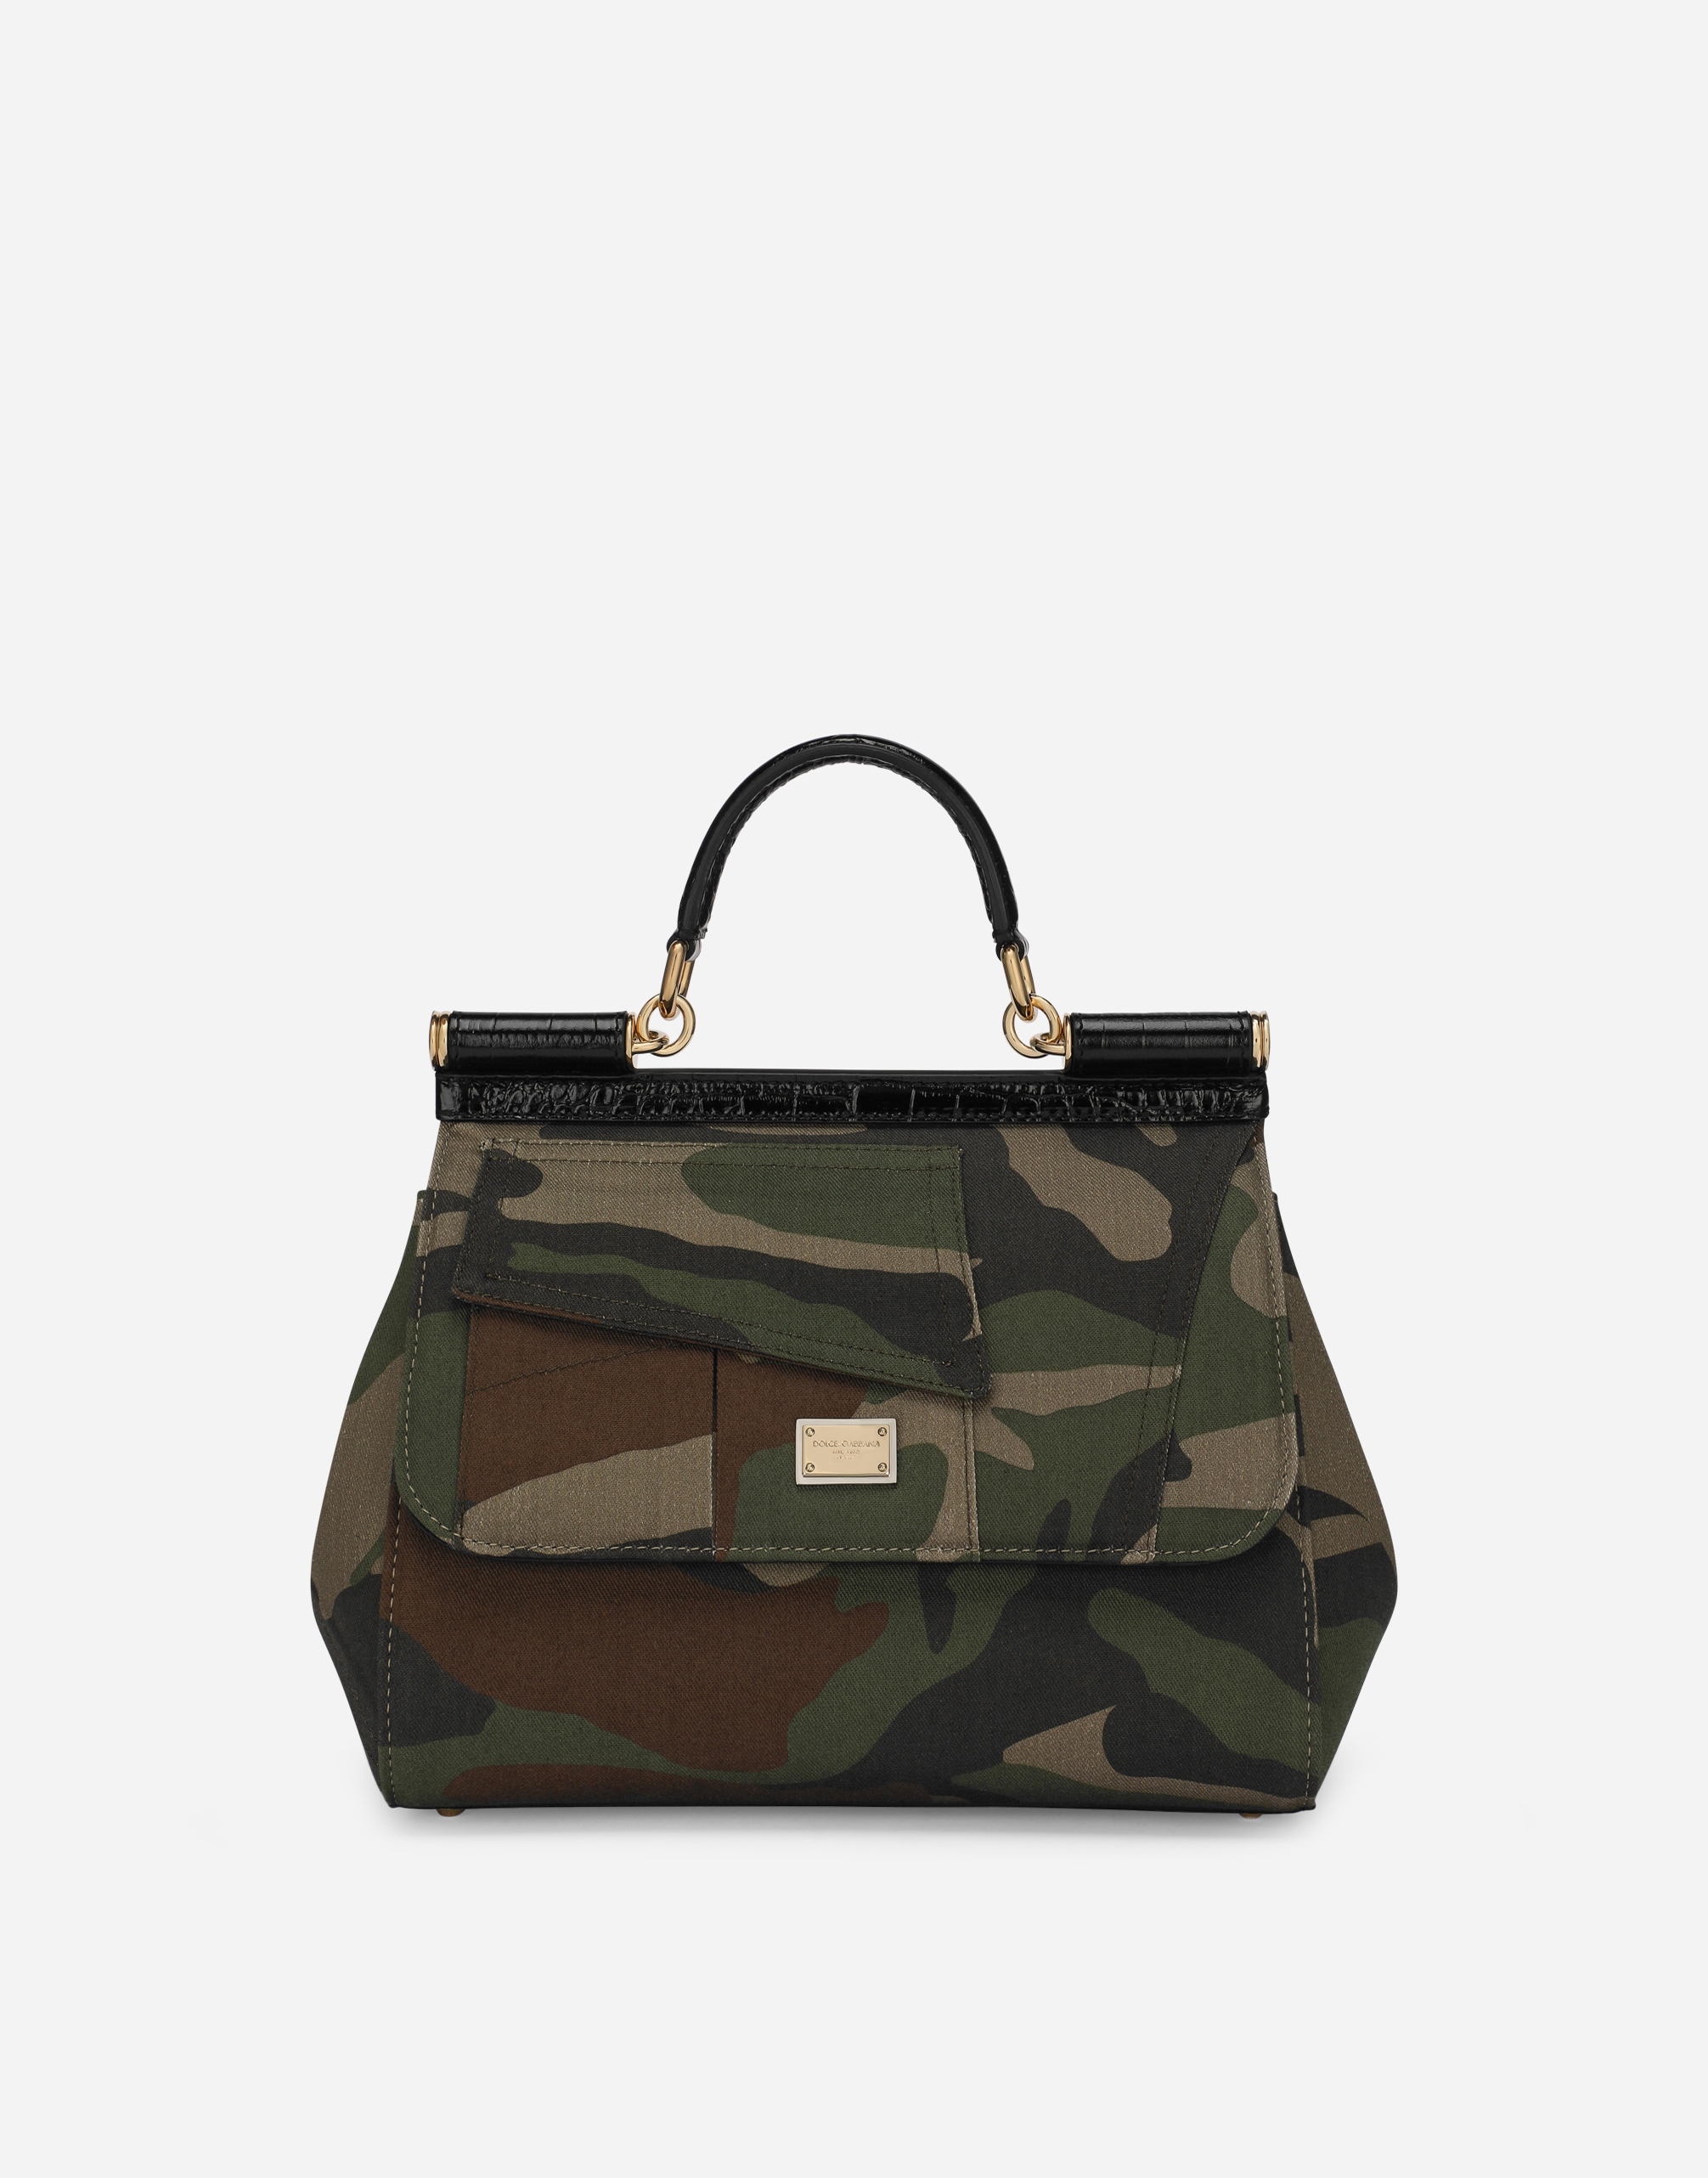 Medium Sicily bag in camouflage patchwork in Multicolor for Women |  Dolce&Gabbana®